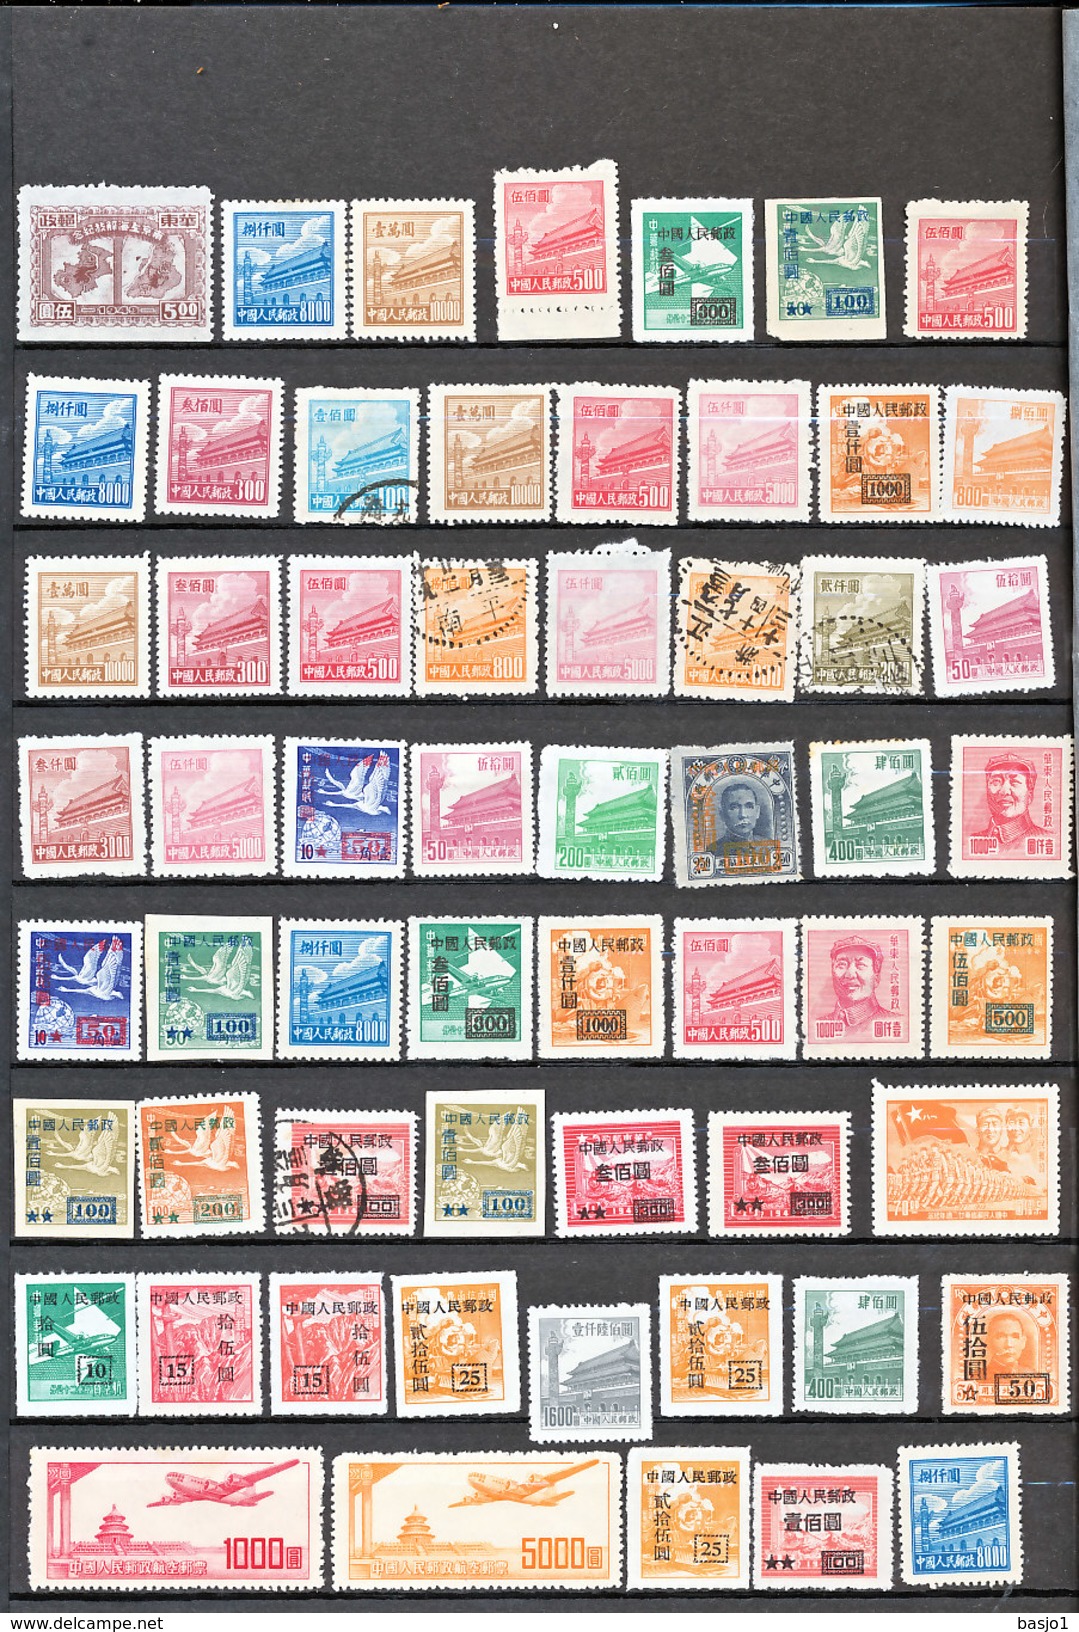 WARNING NO SELLING OUTSIDE DELCAMPE SYSTEM MOST STAMPS FROM CHINA  MIXED CONDITION10 PICTURES